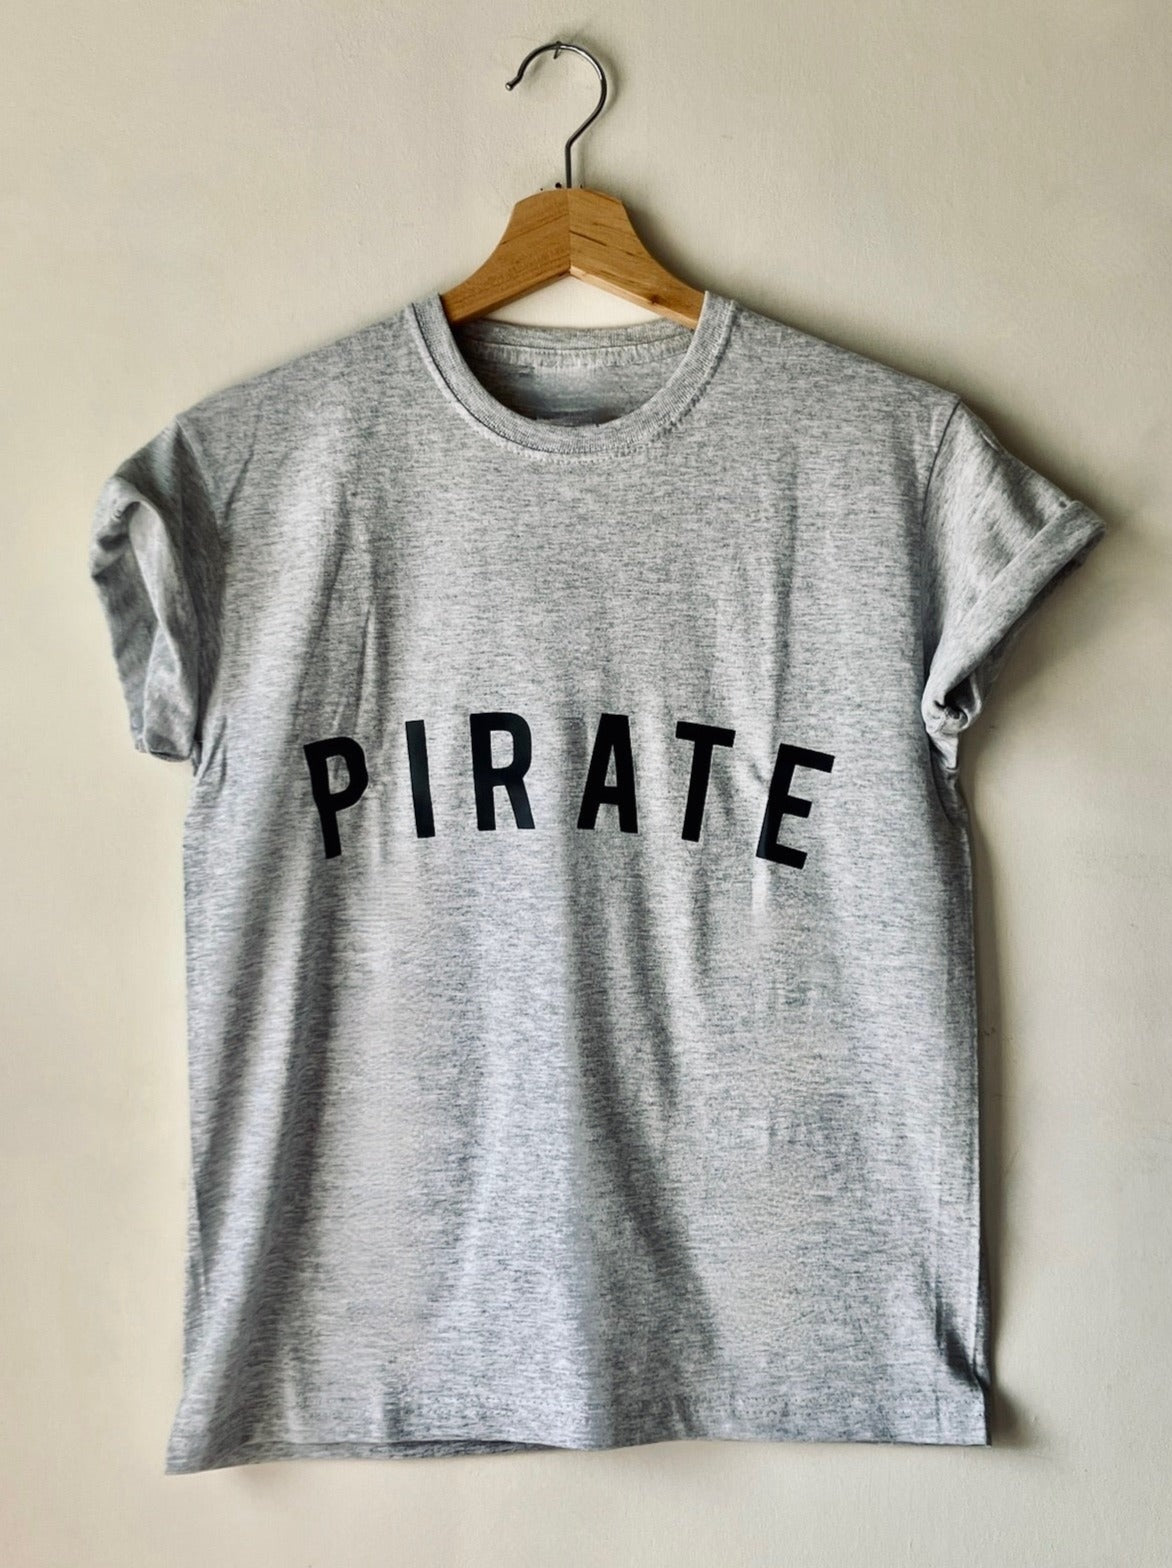 Childs grey marl pirate t-shirt by For Just ONE Day